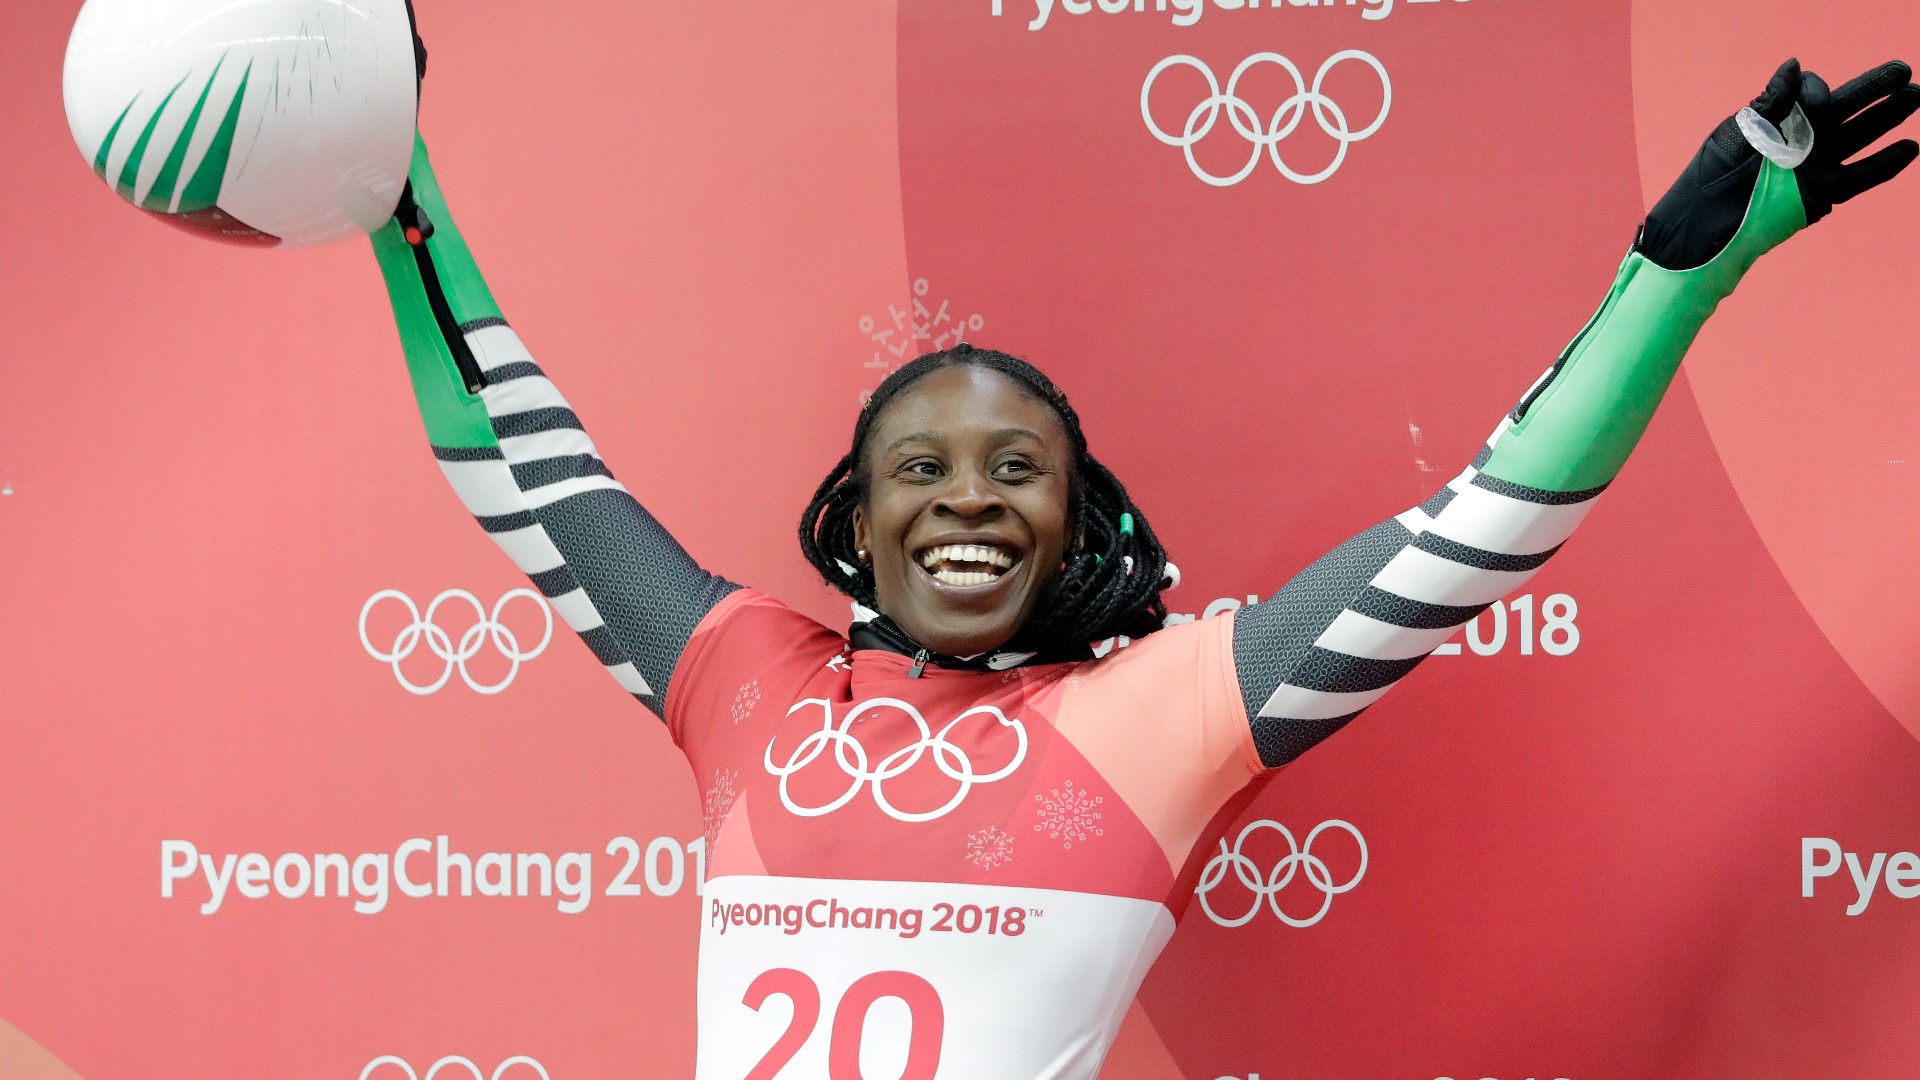 Simidele Adeagbo, who represented Nigeria in the Olympic Winter Games Pyeongchang 2018, hopes to compete in the 2022 Beijing Winter Olympics.